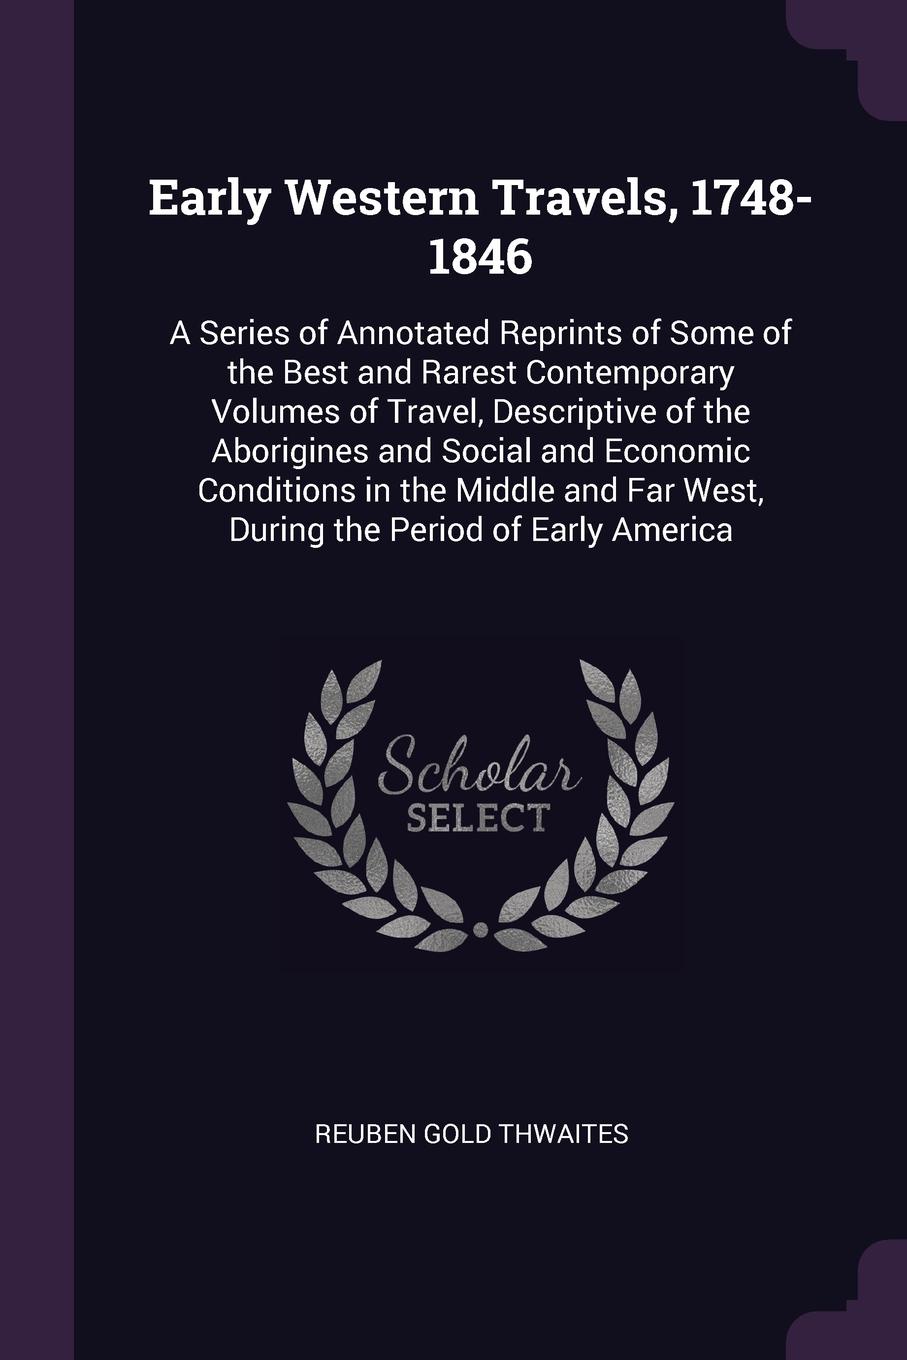 Early Western Travels, 1748-1846. A Series of Annotated Reprints of Some of the Best and Rarest Contemporary Volumes of Travel, Descriptive of the Aborigines and Social and Economic Conditions in the Middle and Far West, During the Period of Early...